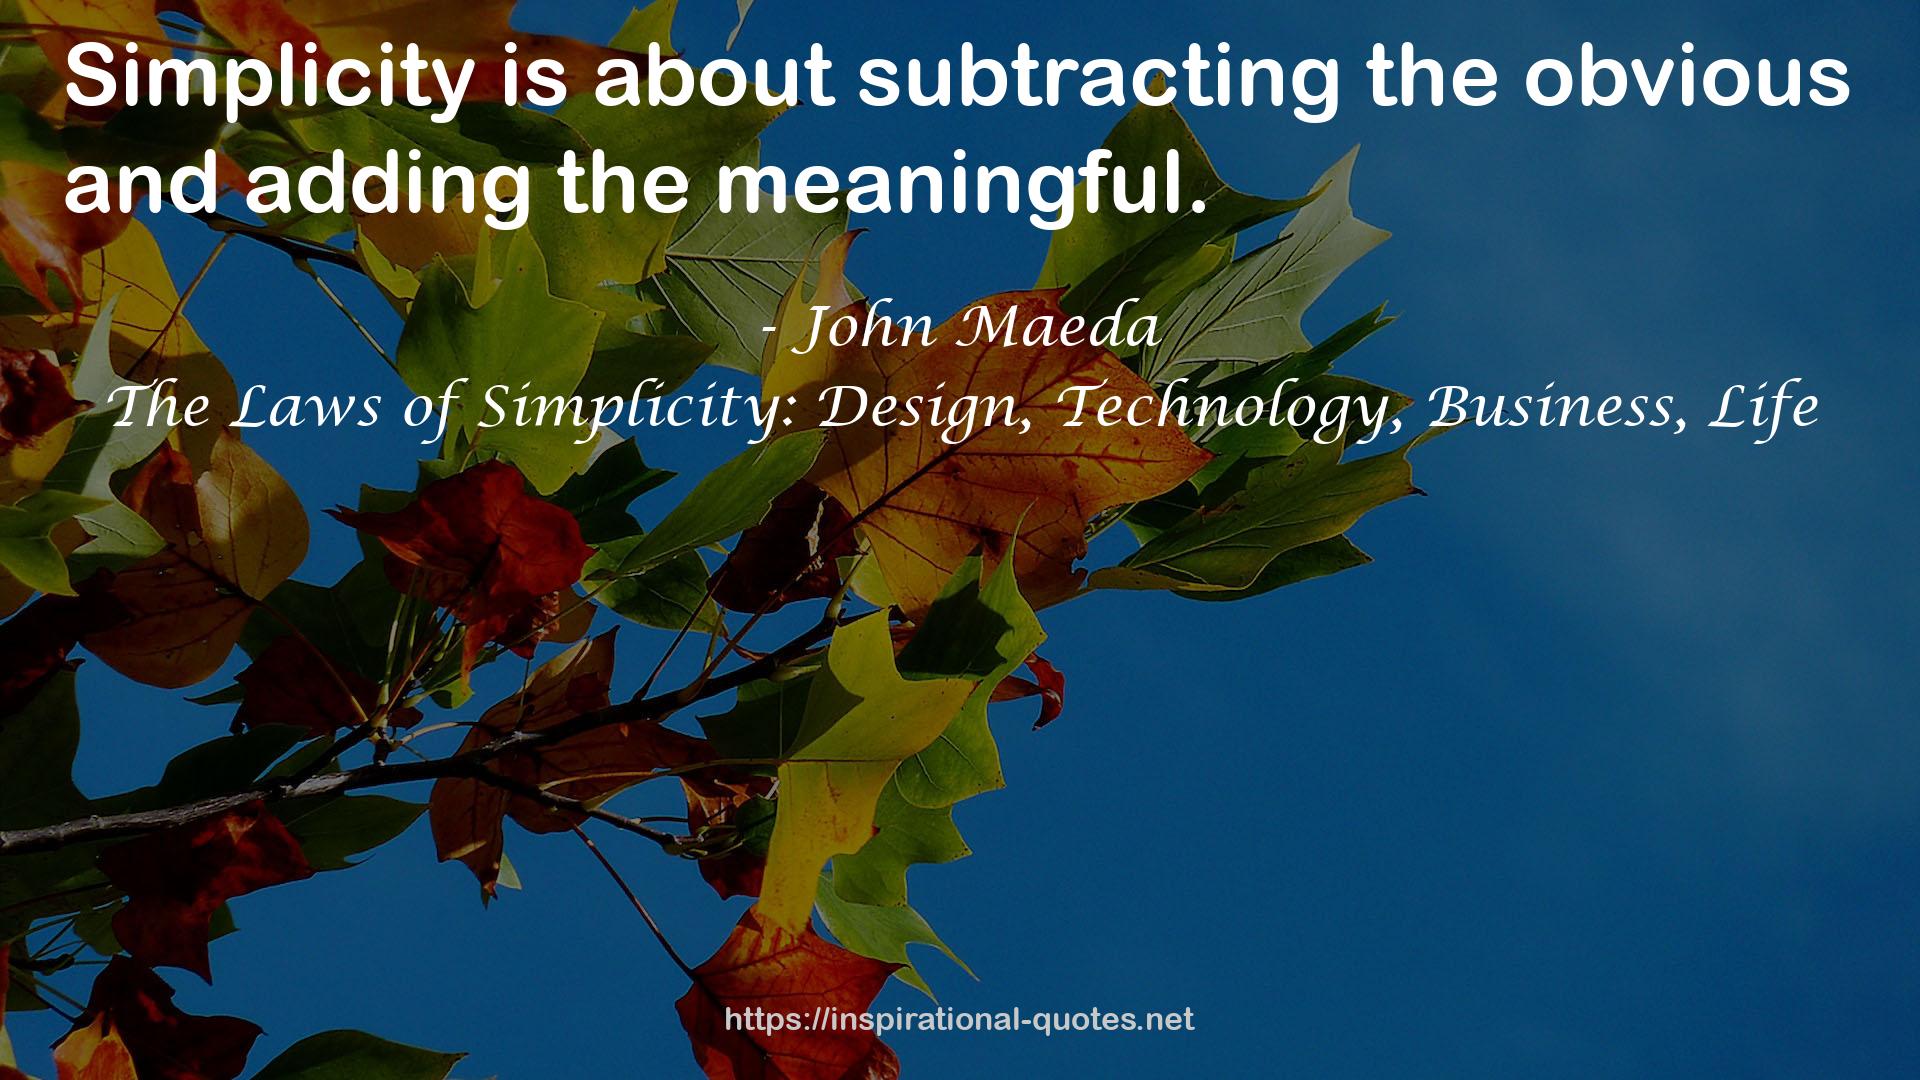 The Laws of Simplicity: Design, Technology, Business, Life QUOTES